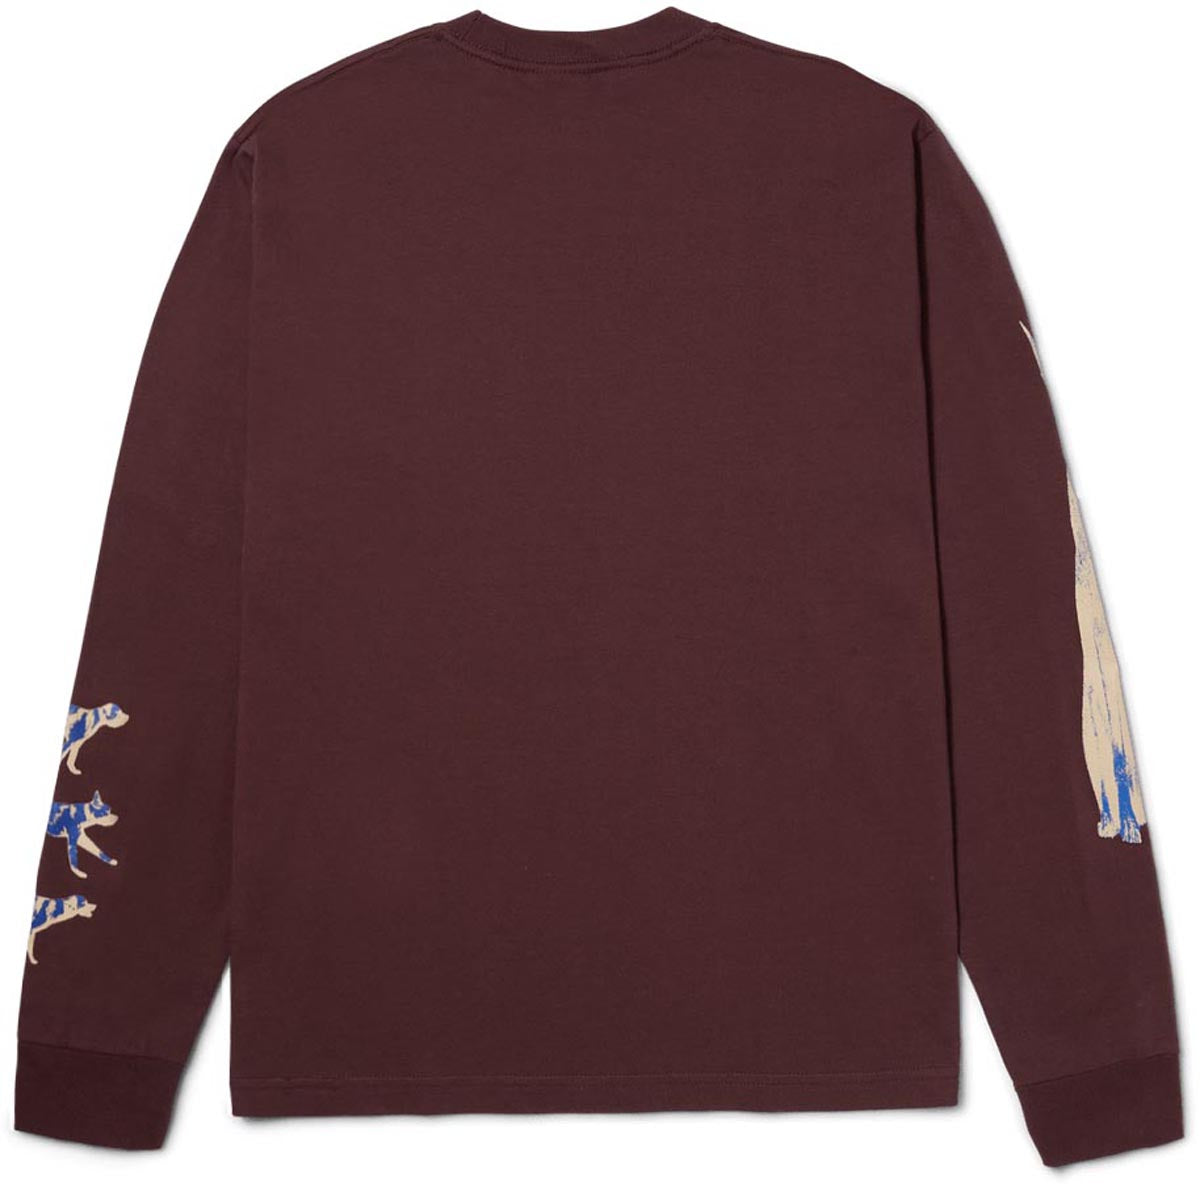 HUF Red Means Go Long Sleeve T-Shirt - Eggplant image 4